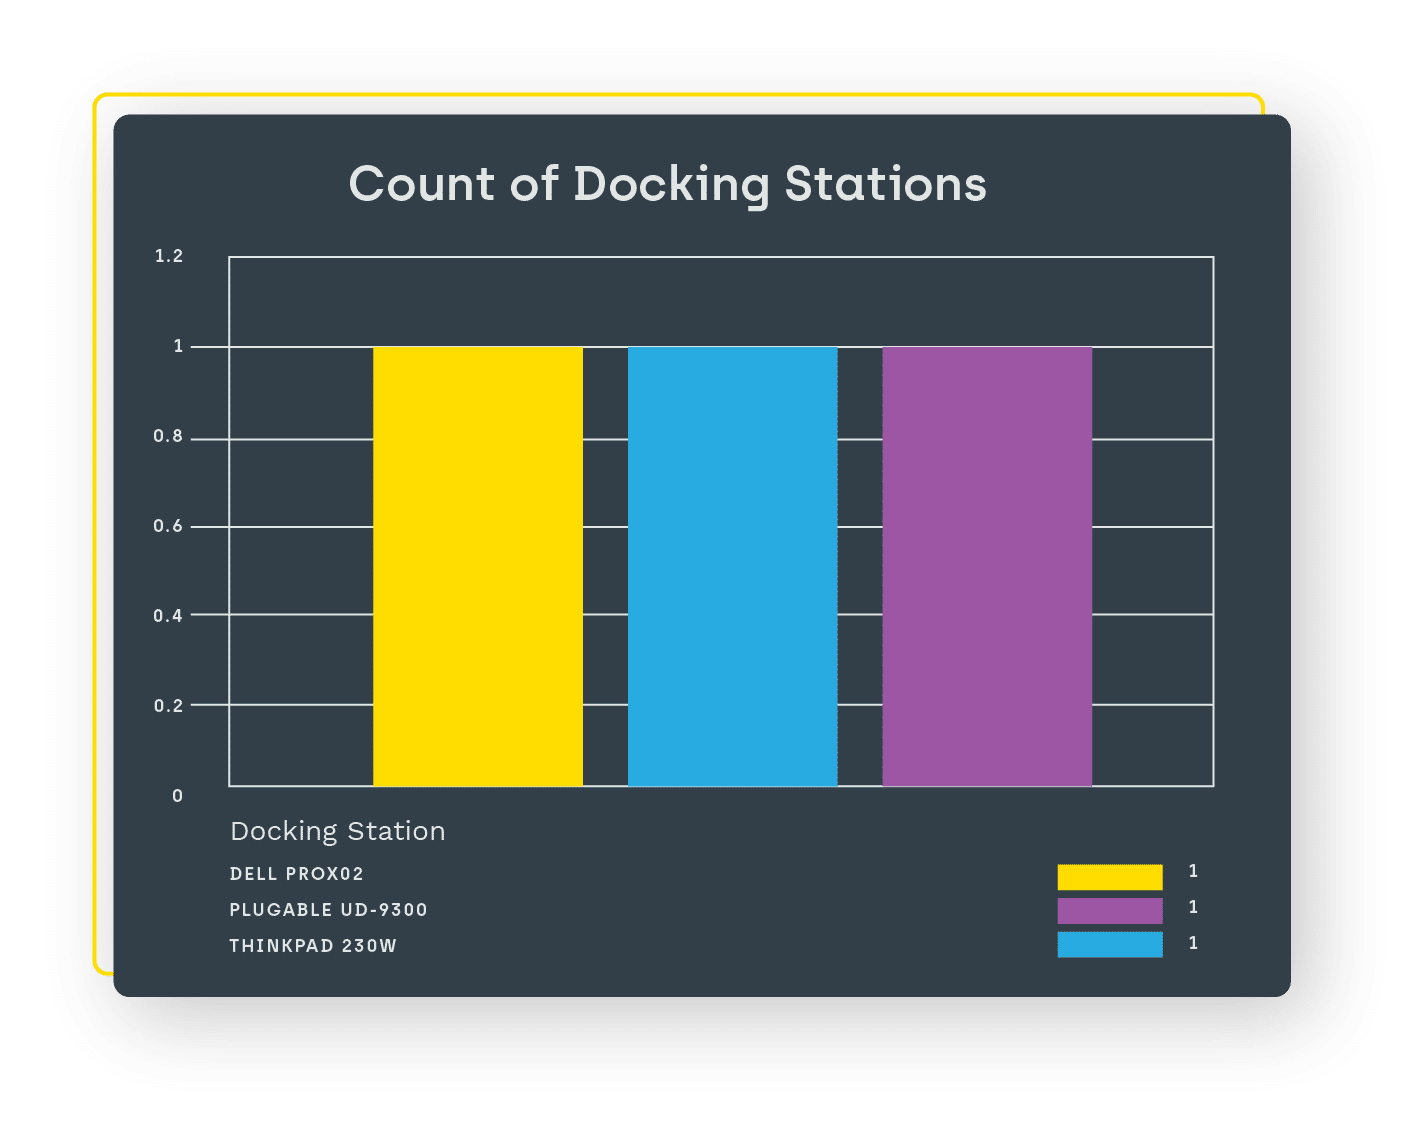 Count of Docking Stations